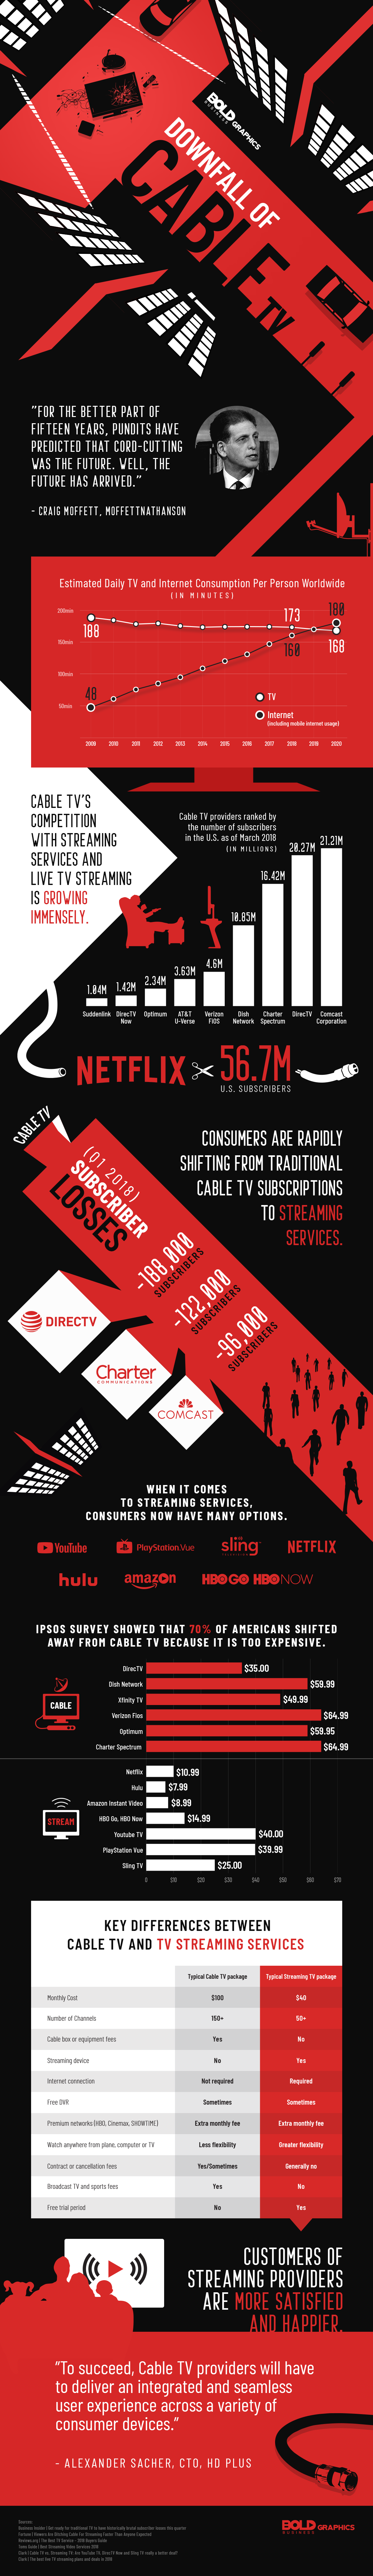 Downfall of Cable TV Statistics Infographic